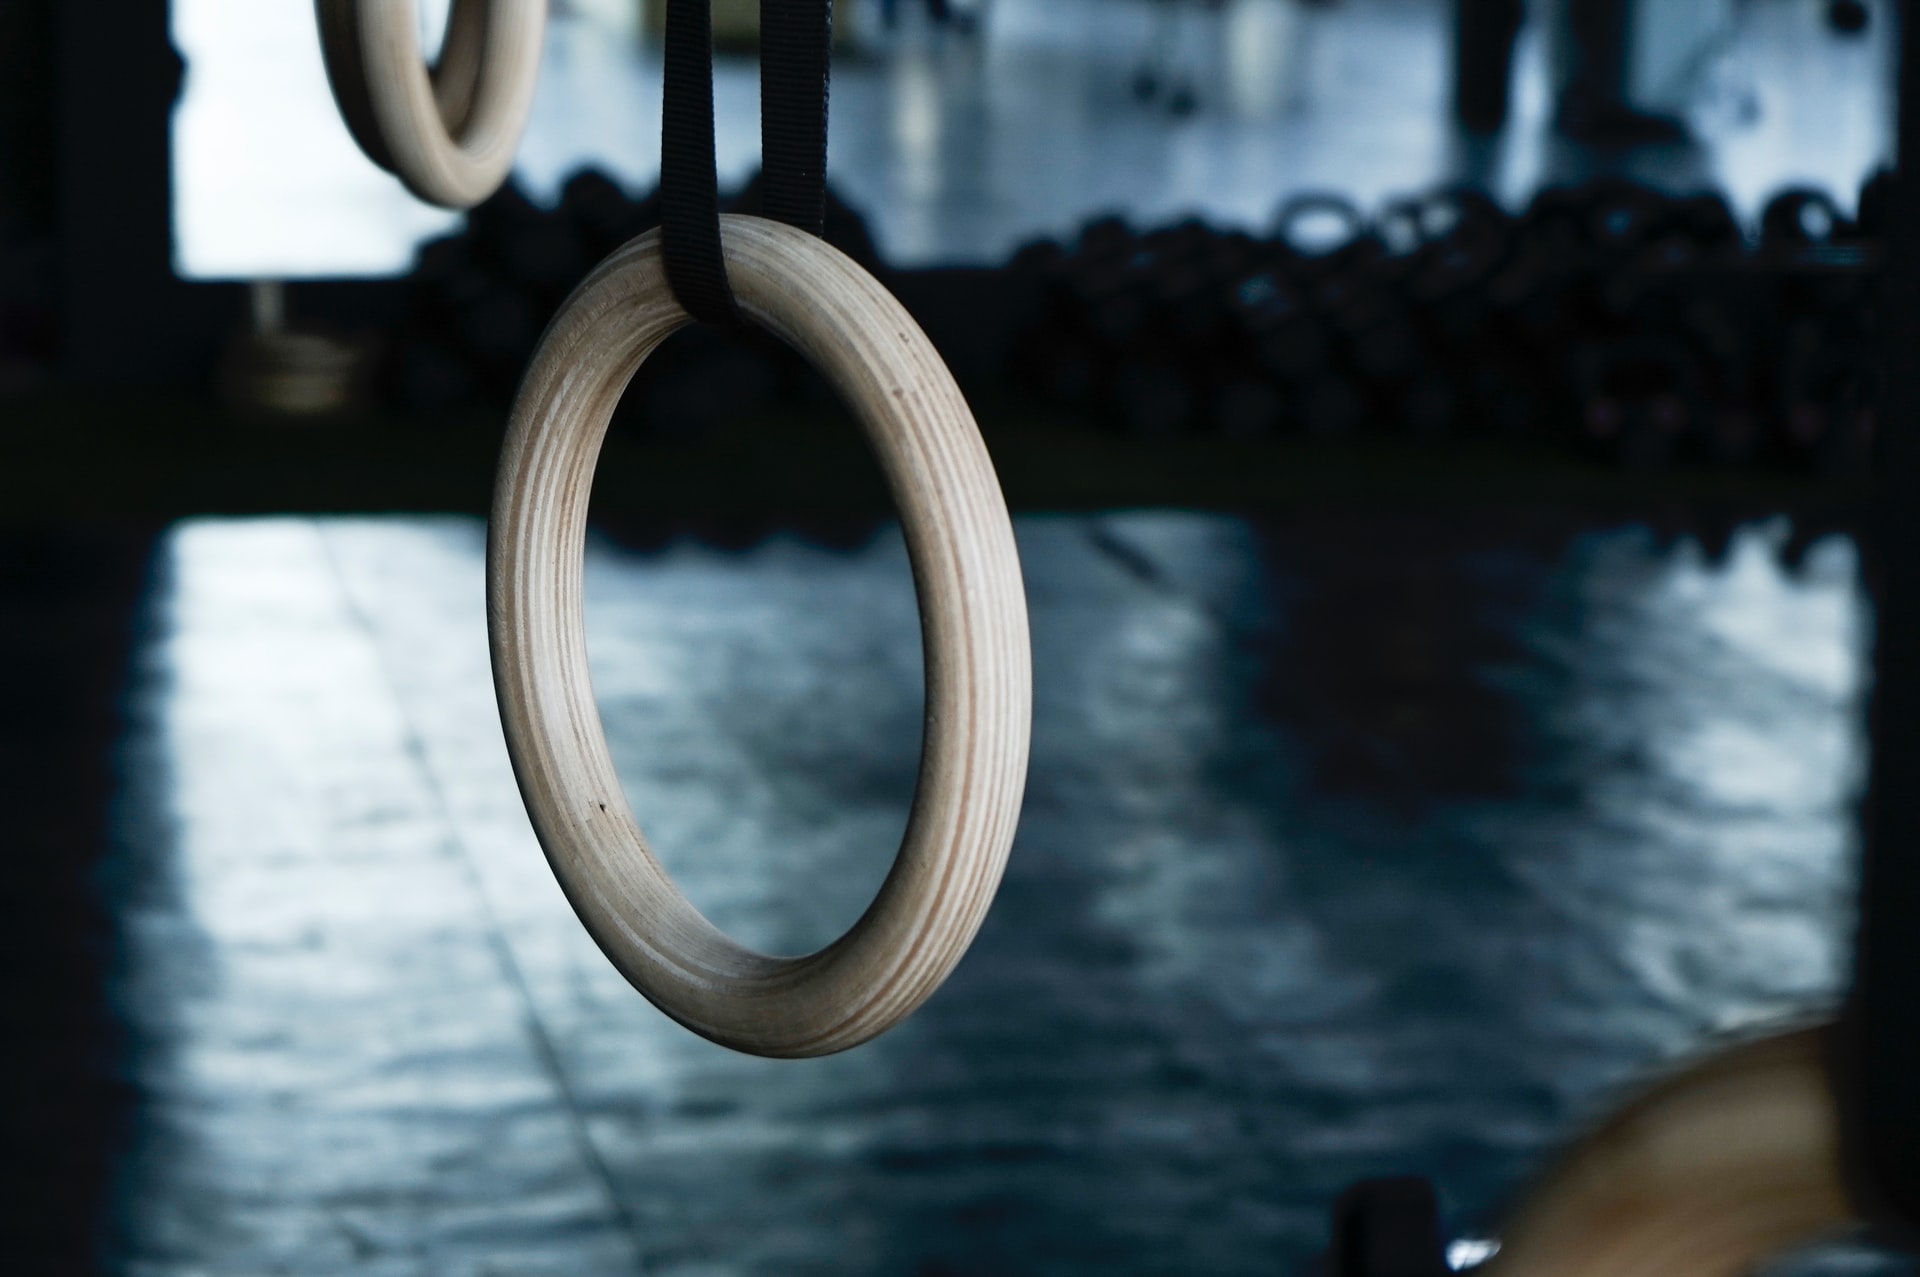 A white plastic hoop in a gym business